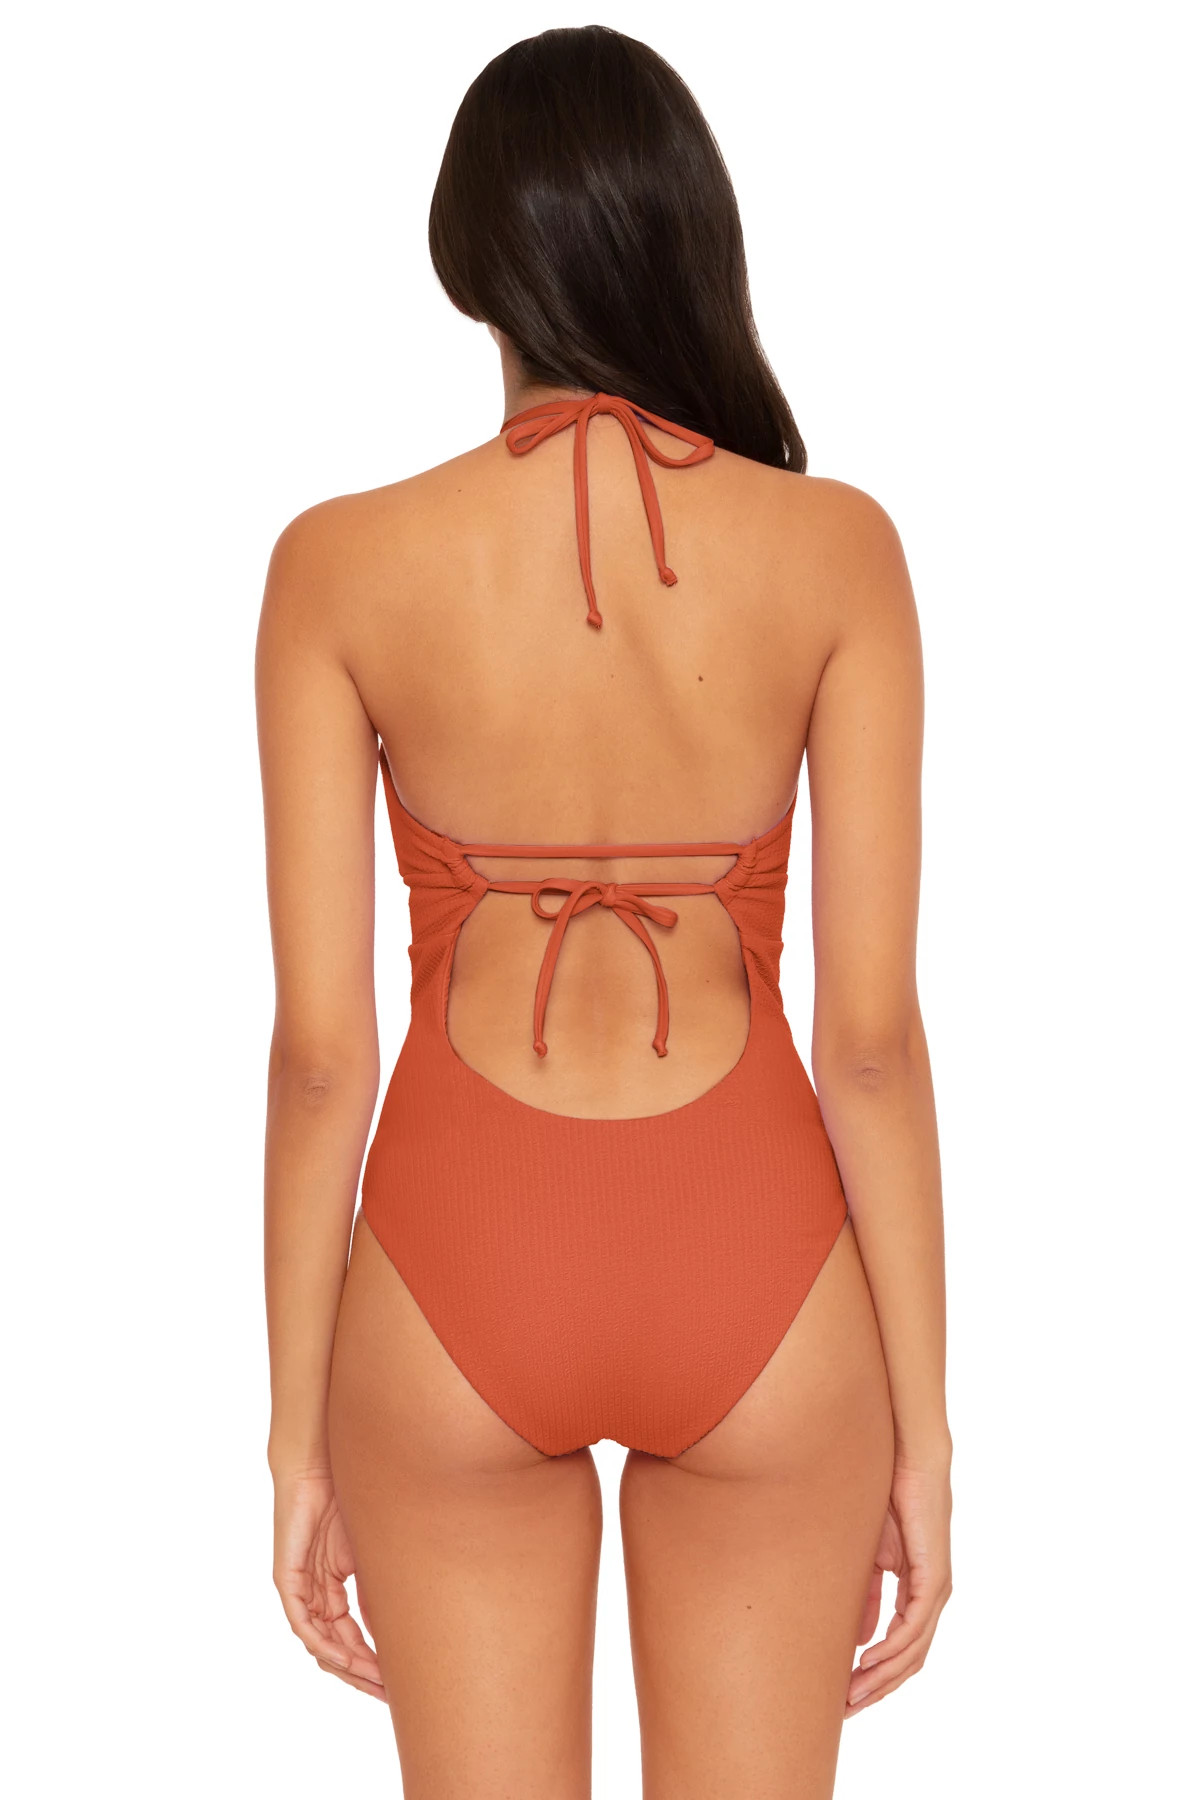 GINGER Candice Convertible Halter One Piece Swimsuit image number 3